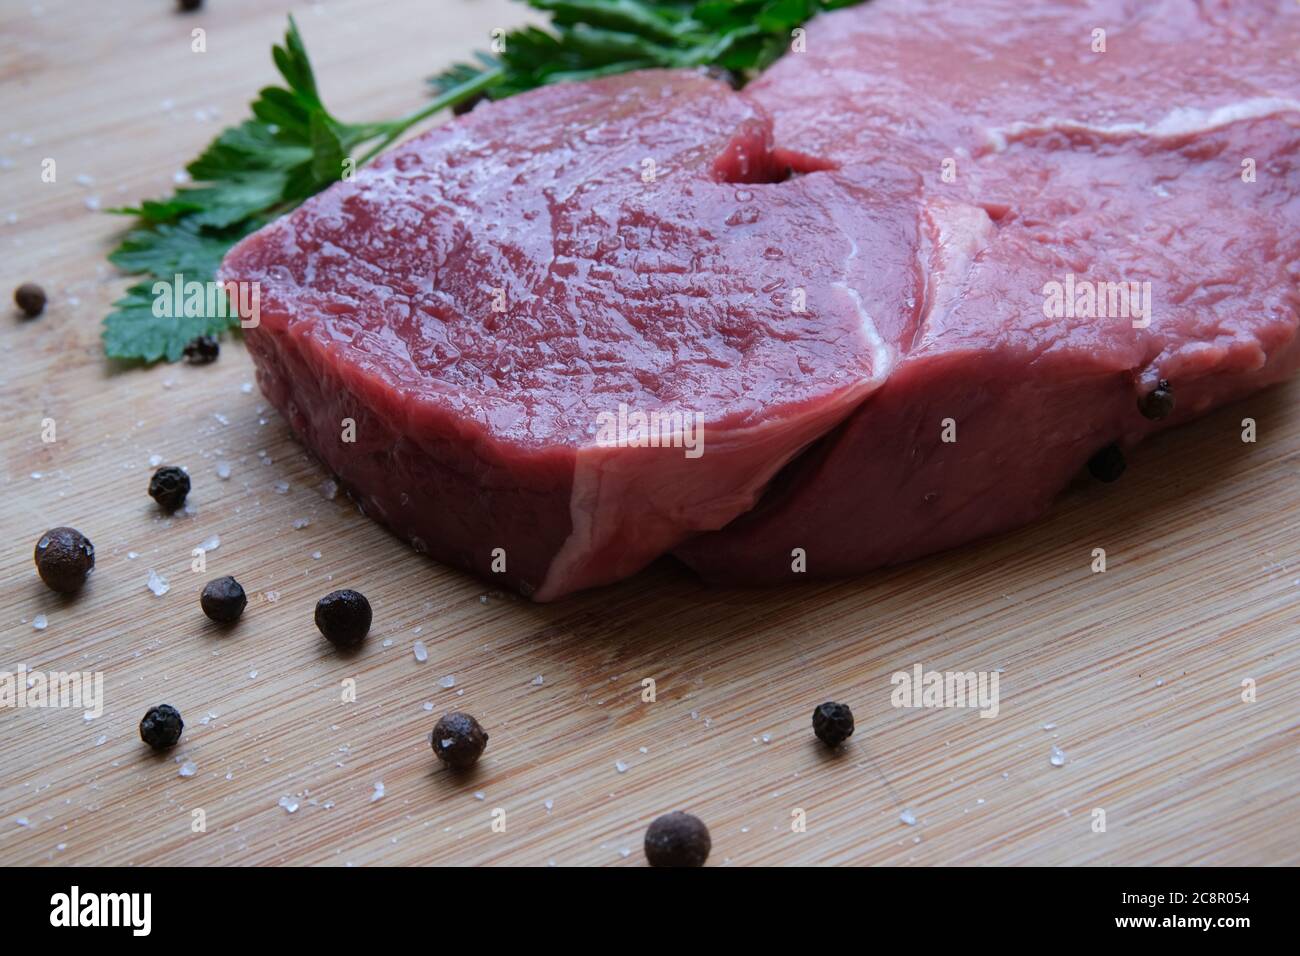 Rump beef steak. Piece of 21 day matured beef meat on the bamboo wooden table with black pepper and sea salt crystals. Stock Photo